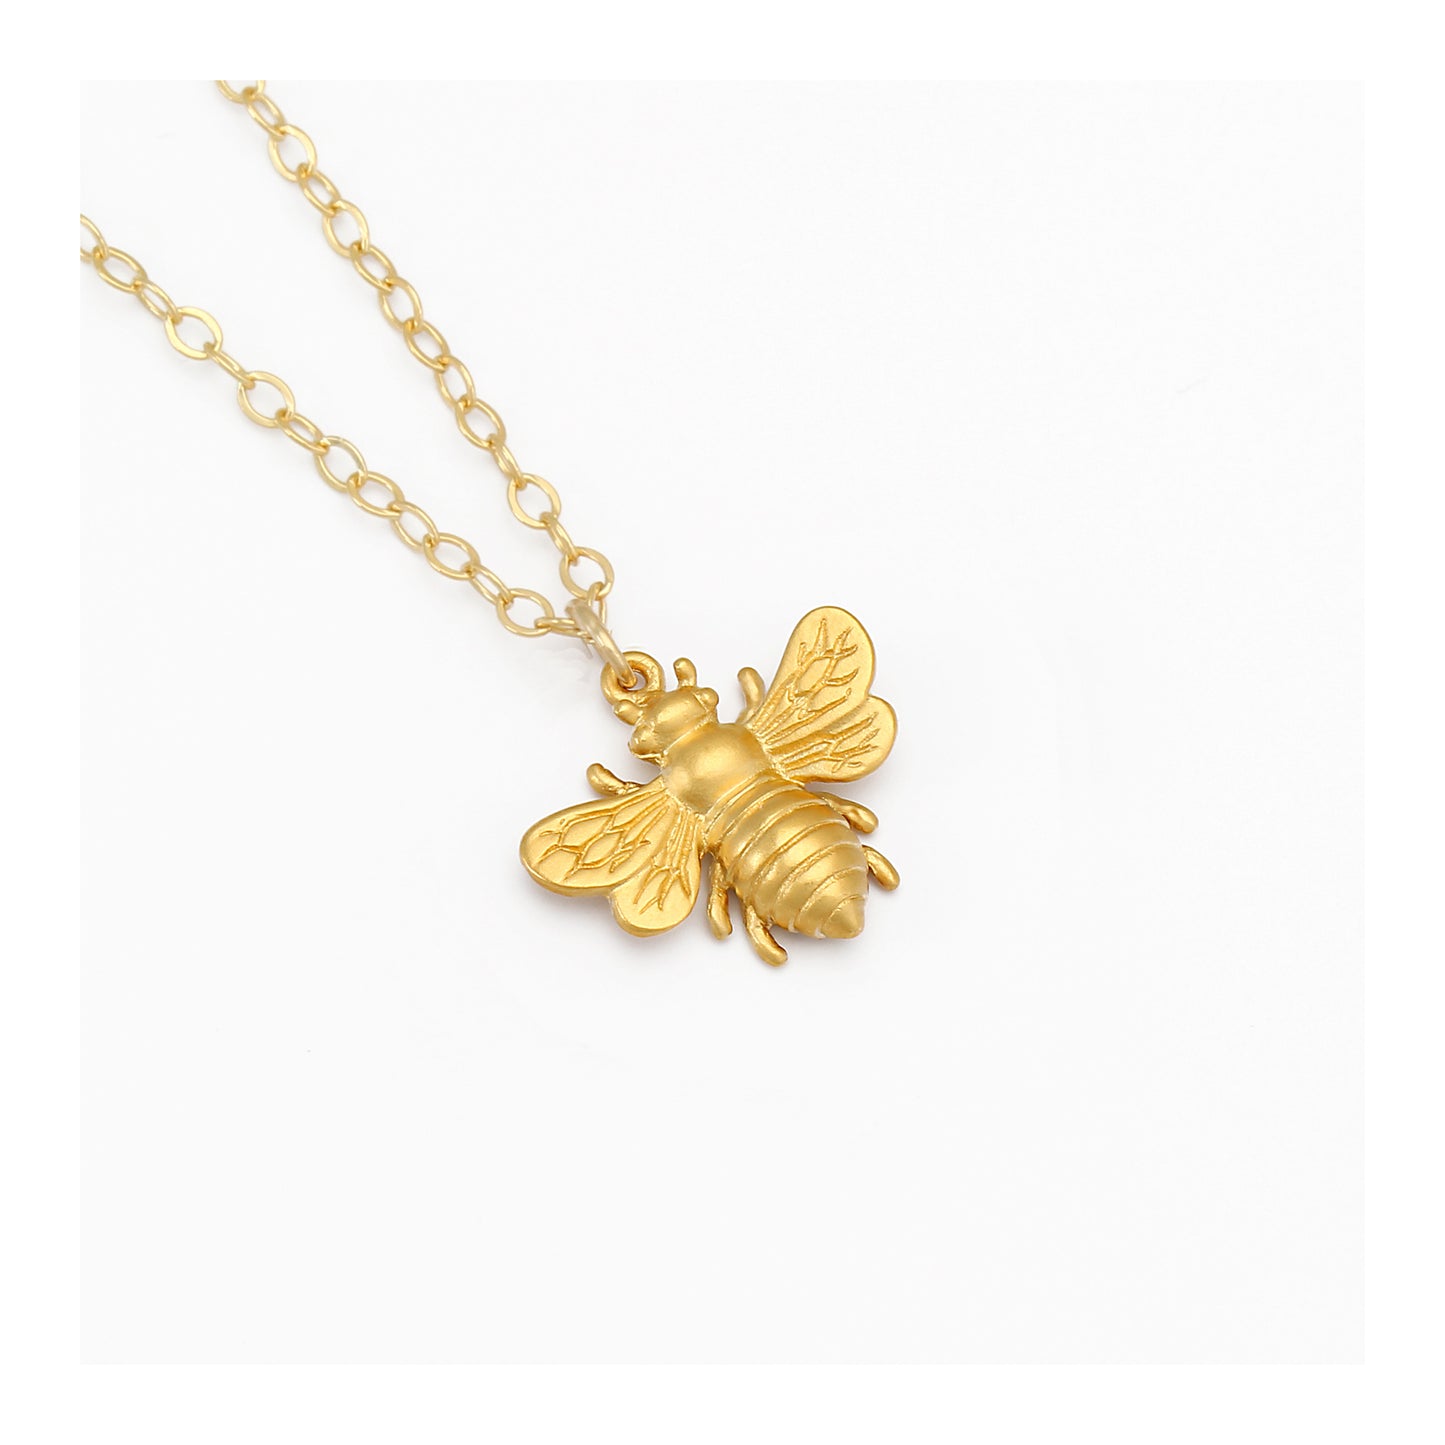 Little Gold Bee Necklace • Gold Honeybee/Bumblebee Charm • Simple Everyday Jewelry • Bridesmaid Gift • Garden Themed Wedding • Save the Bees